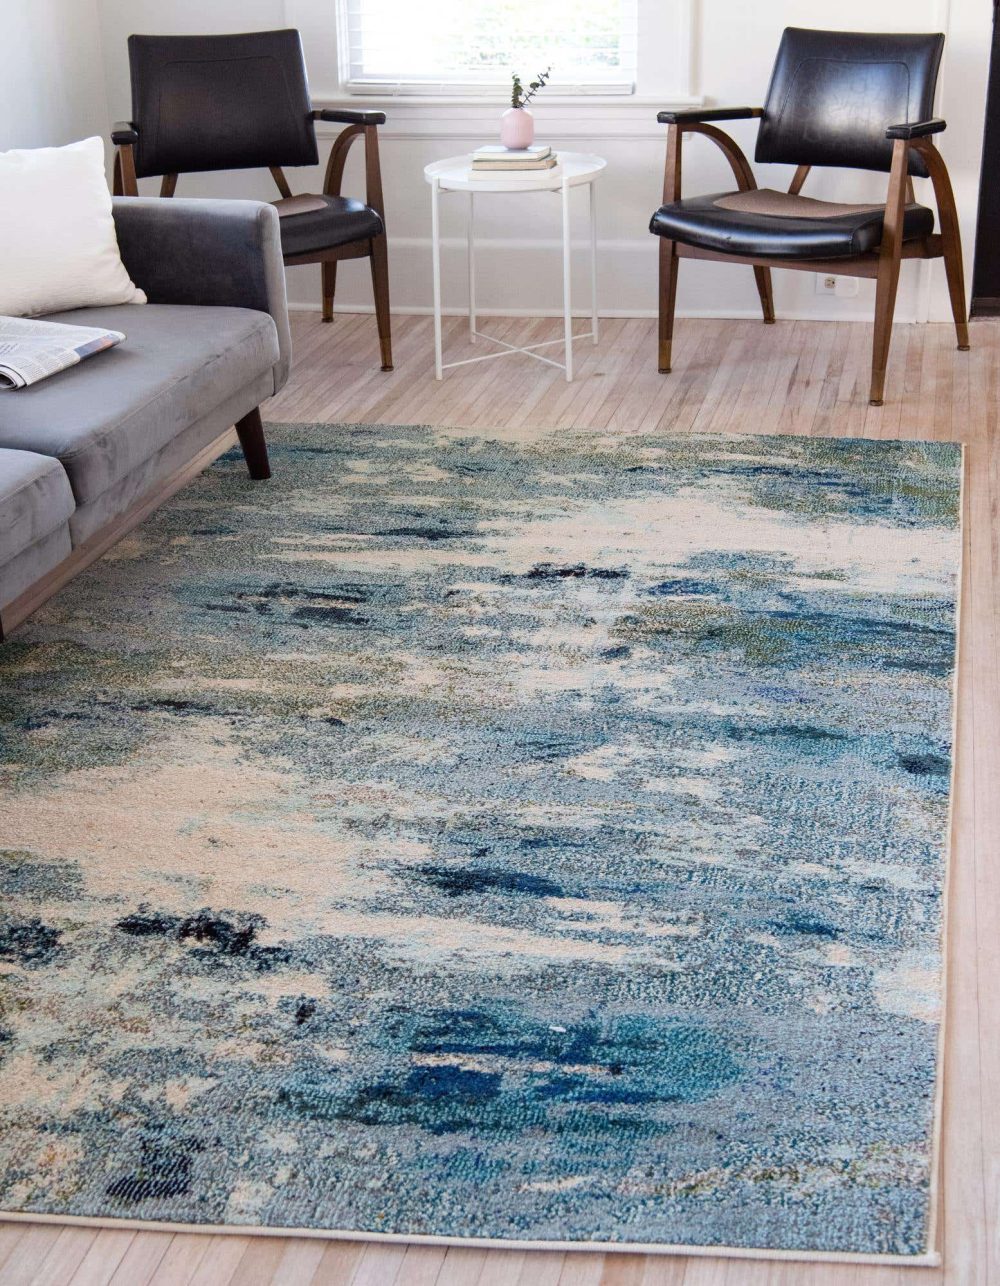 12 Add An Abstract Area Rug In Awesome Colors 1000x1286 